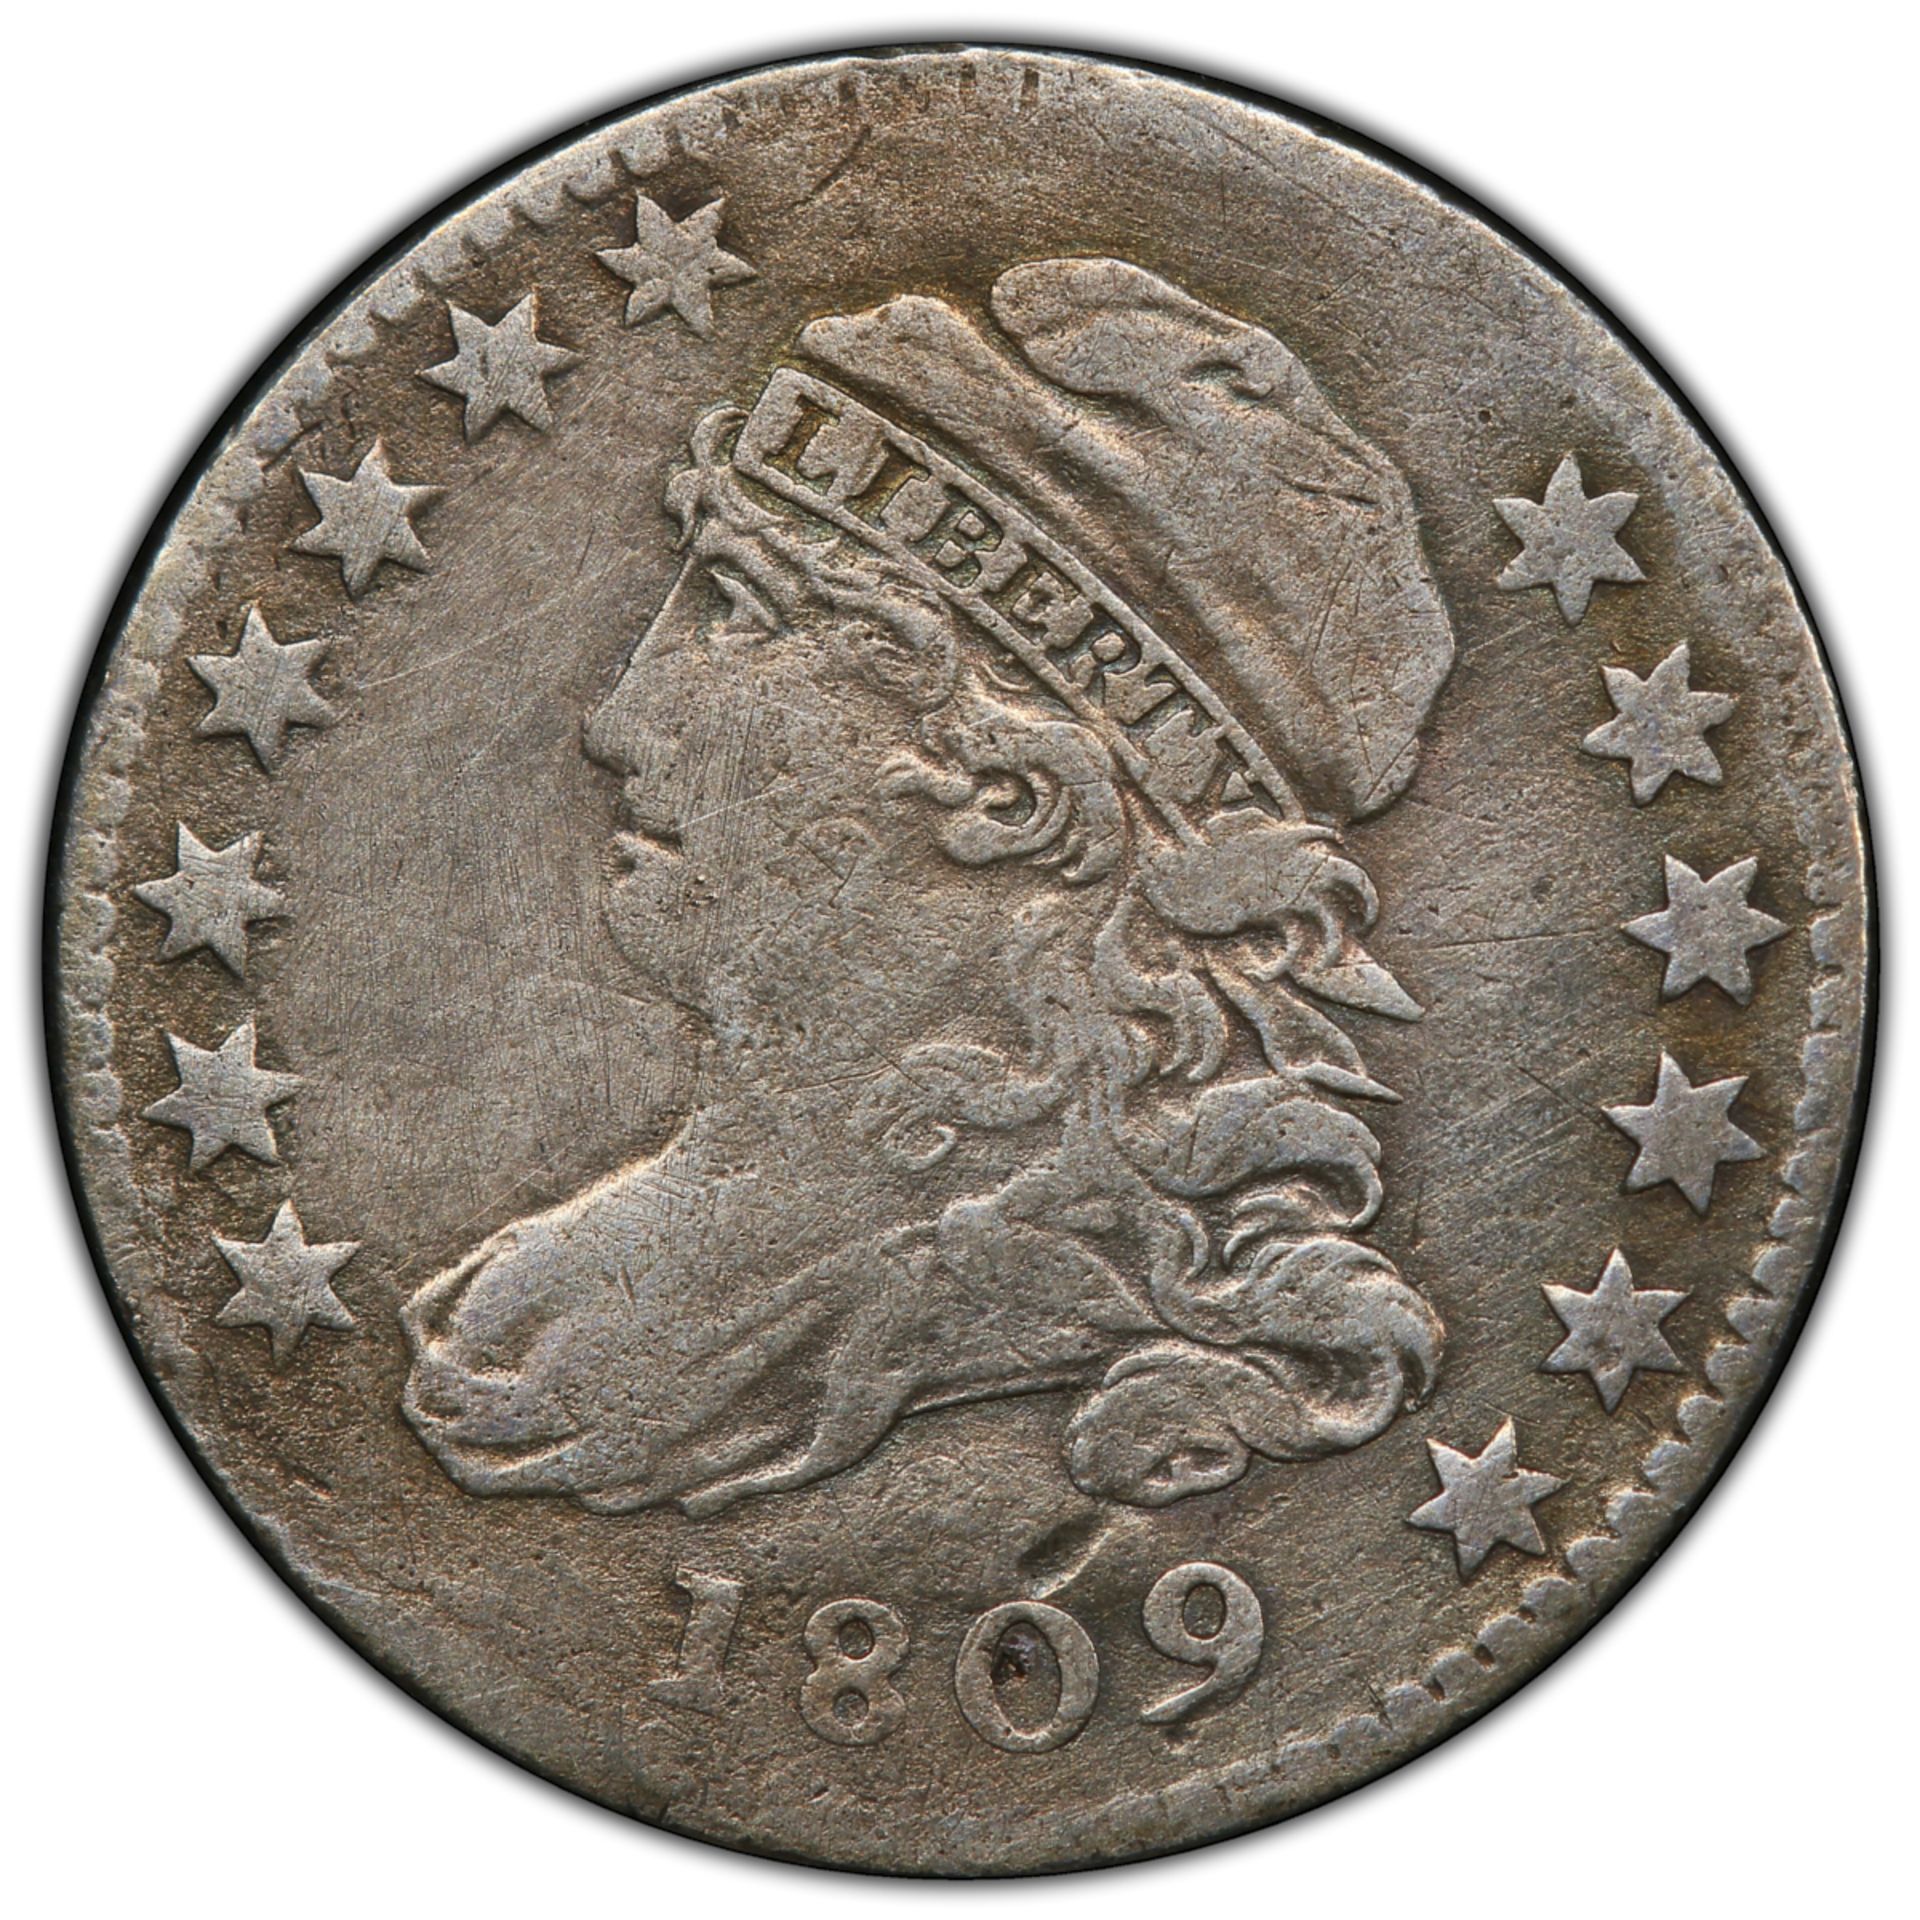 1809 Capped Bust Dime 10C VF PCGS - Image 2 of 4